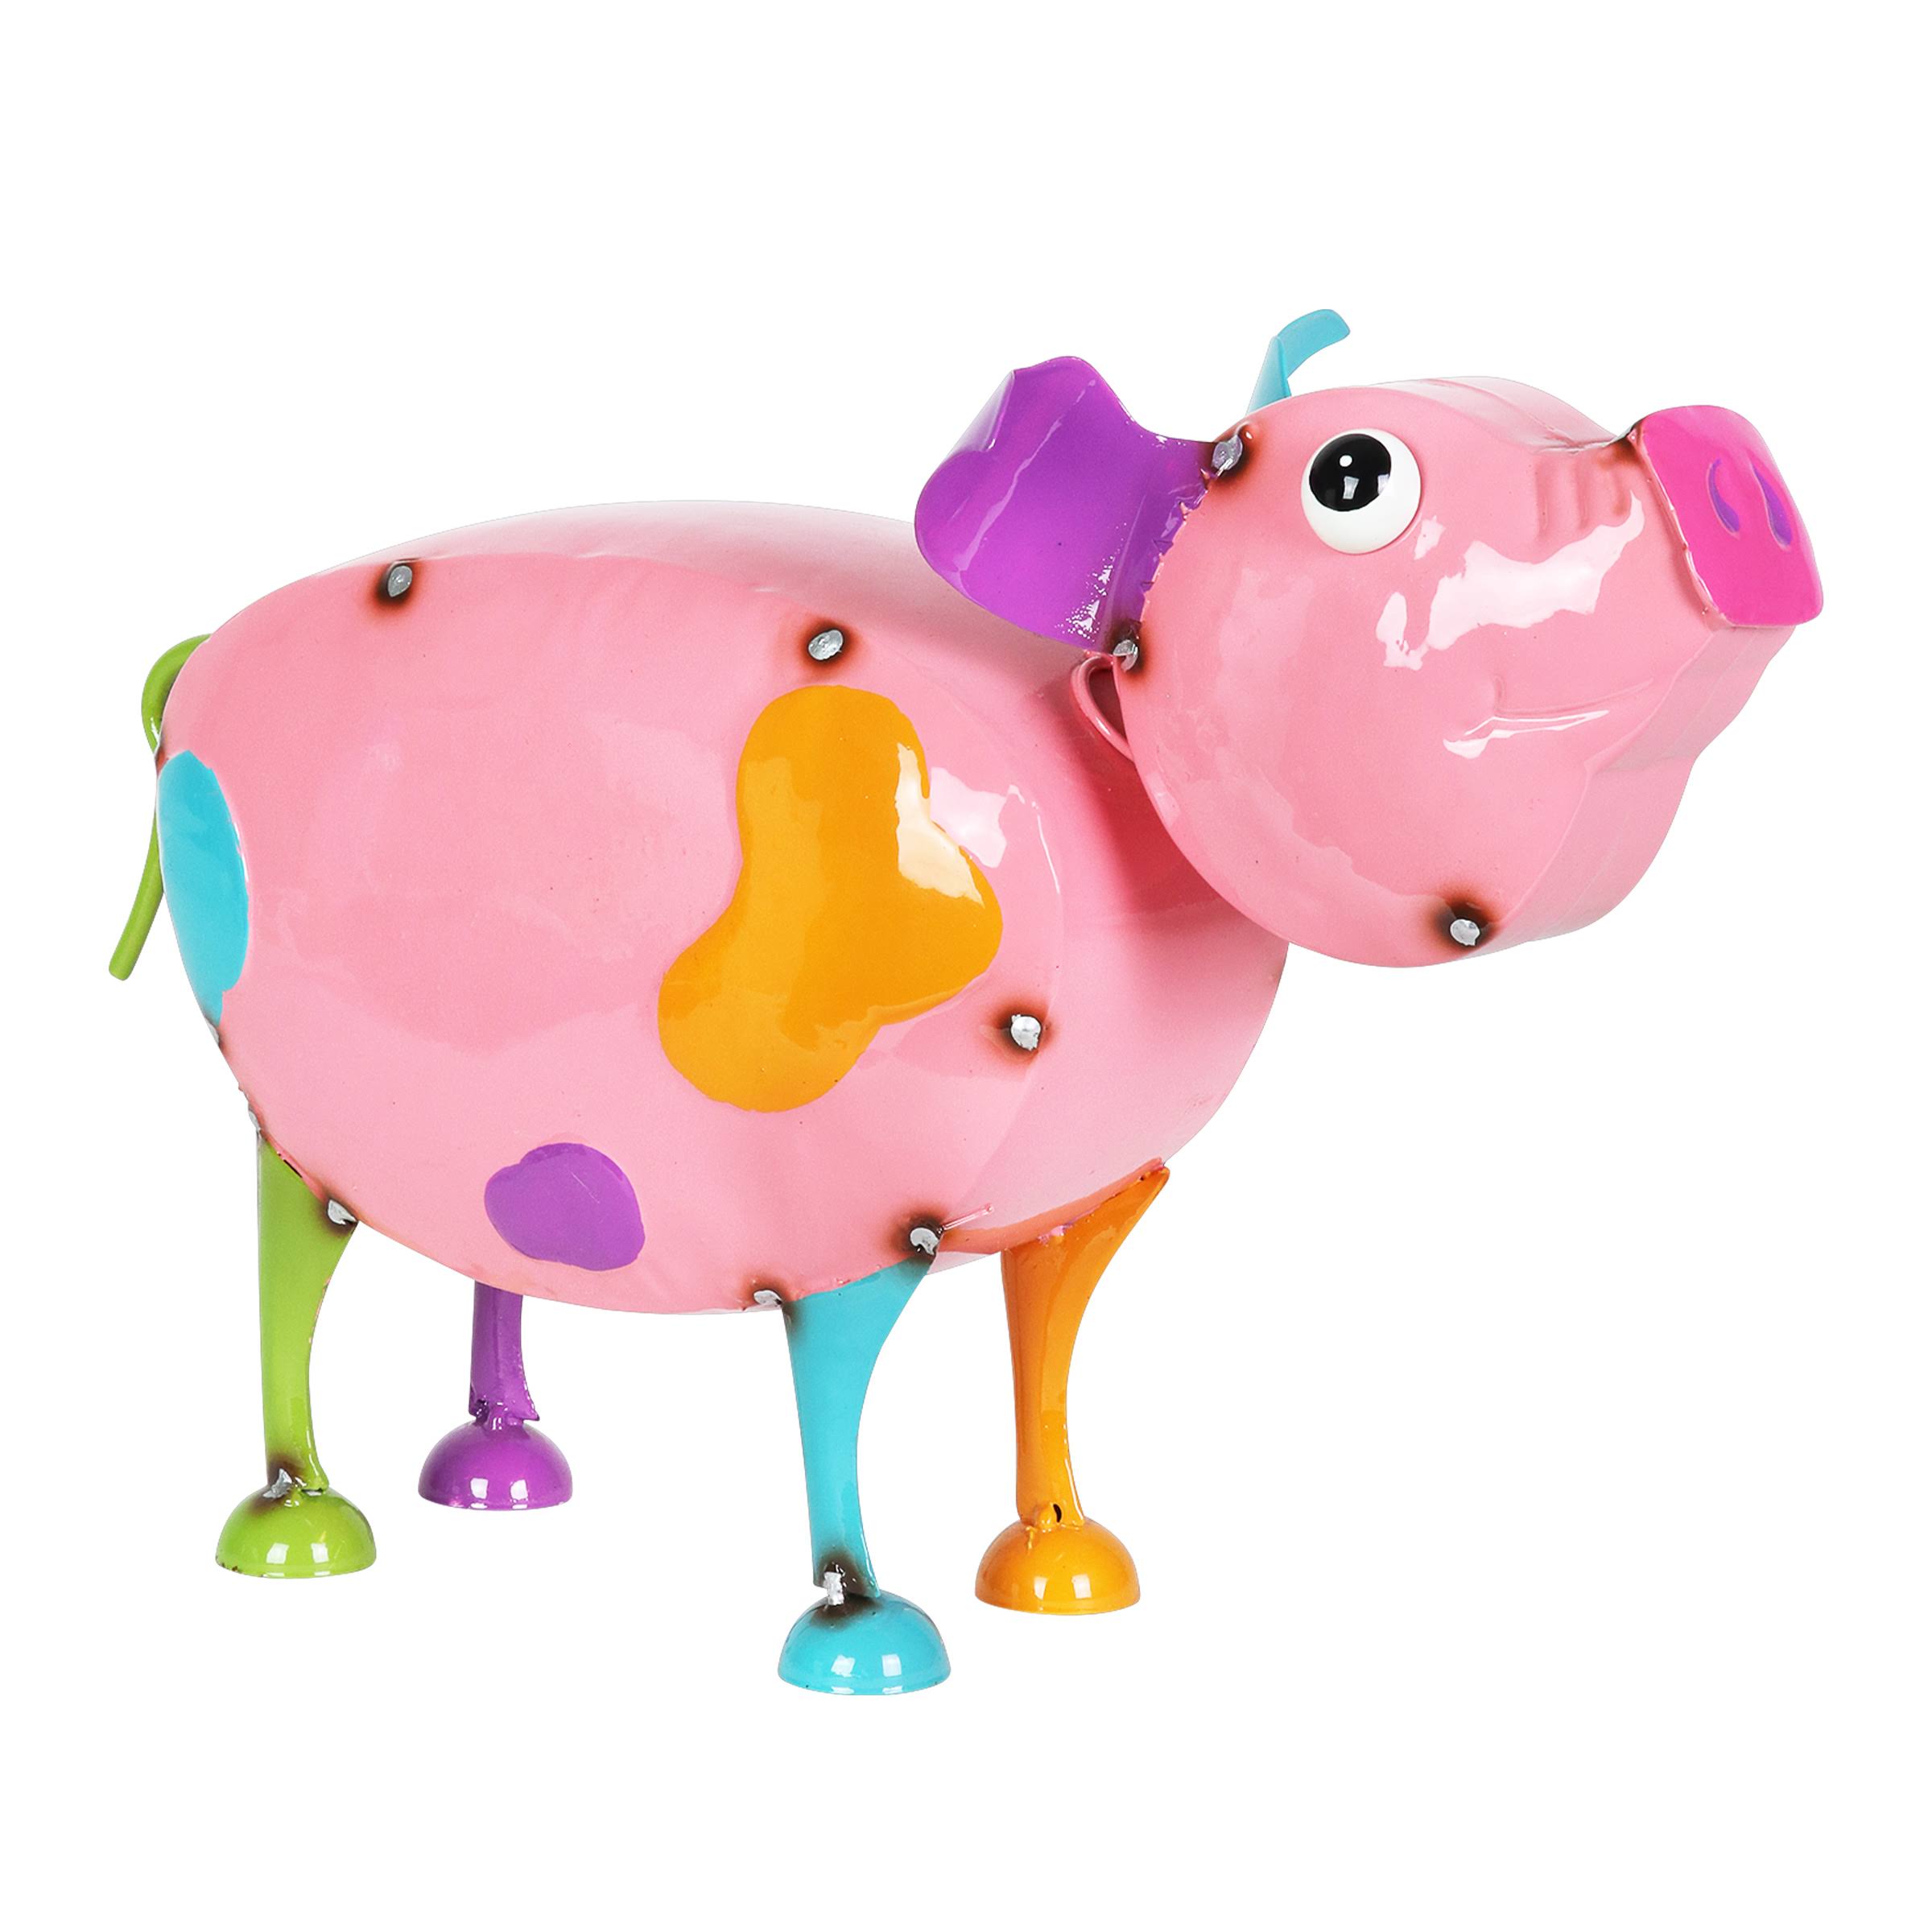 Exhart Exhart Hand Painted Pink Metal Pig Statuary, 15 By 9 Inches